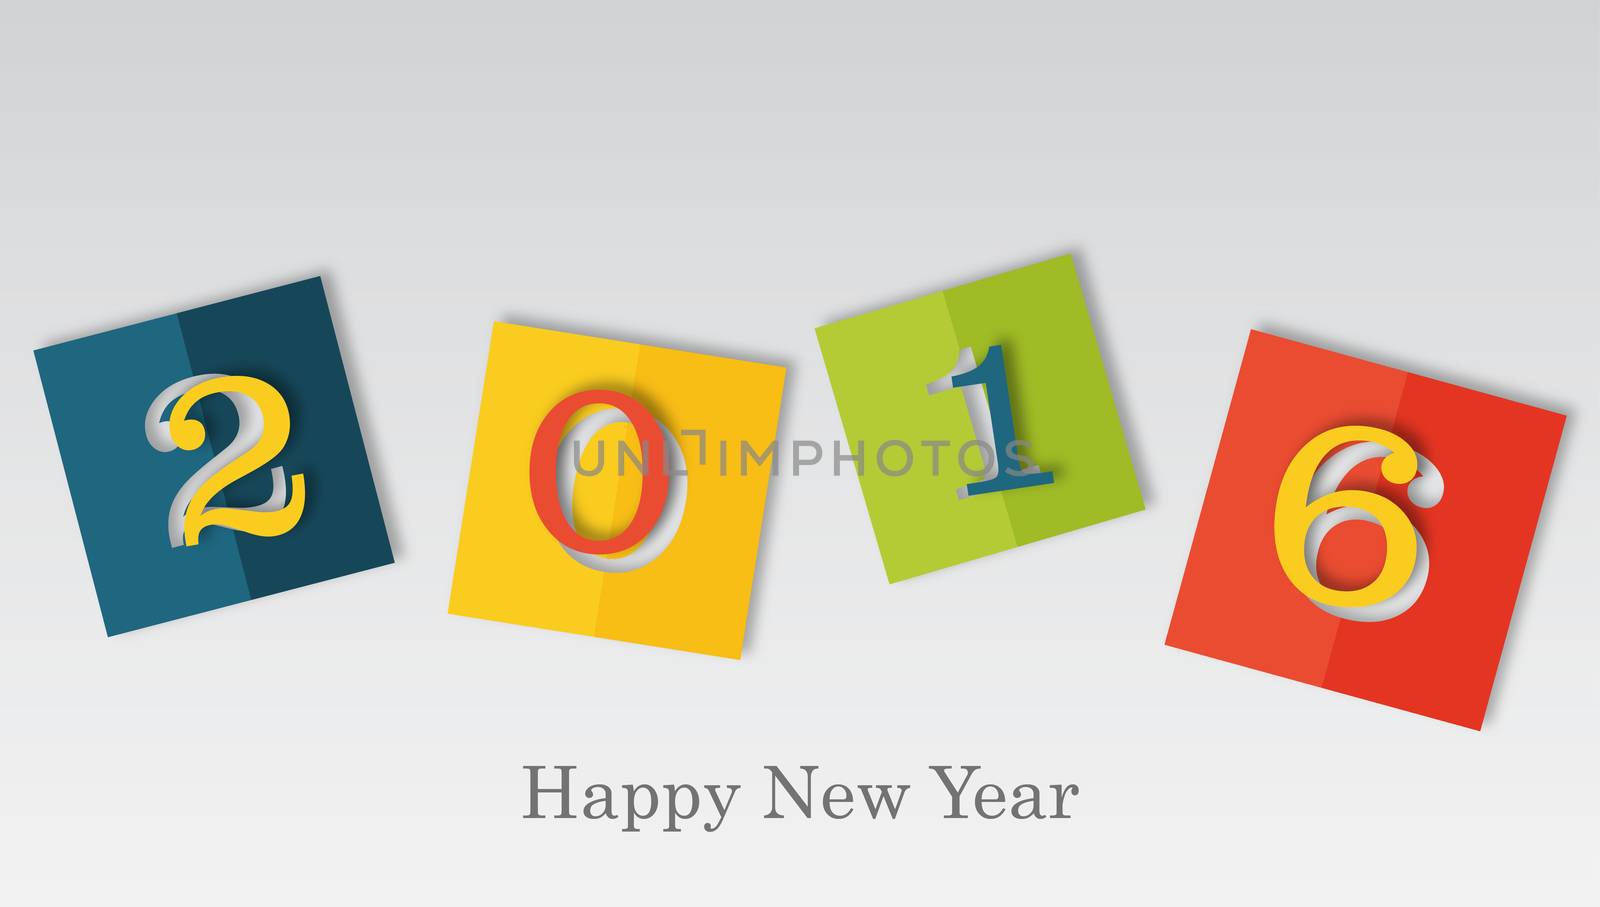 happy new year 2016 in colored piece of paper with cut off figures, holiday seasonal concept